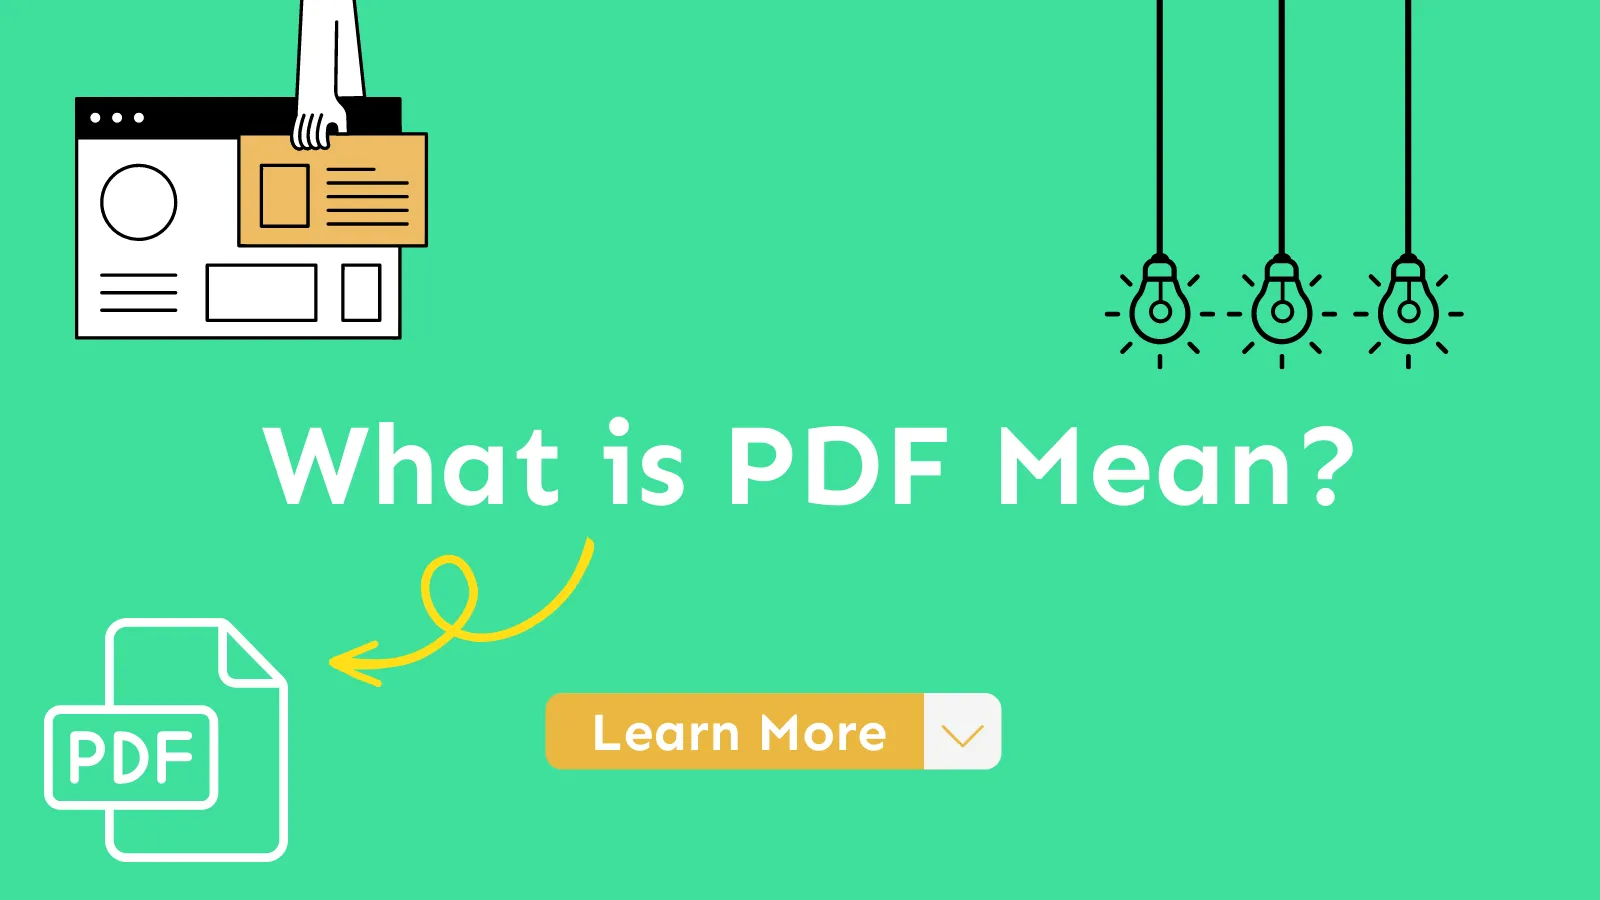 What is PDF Mean (Portable Document Format)?